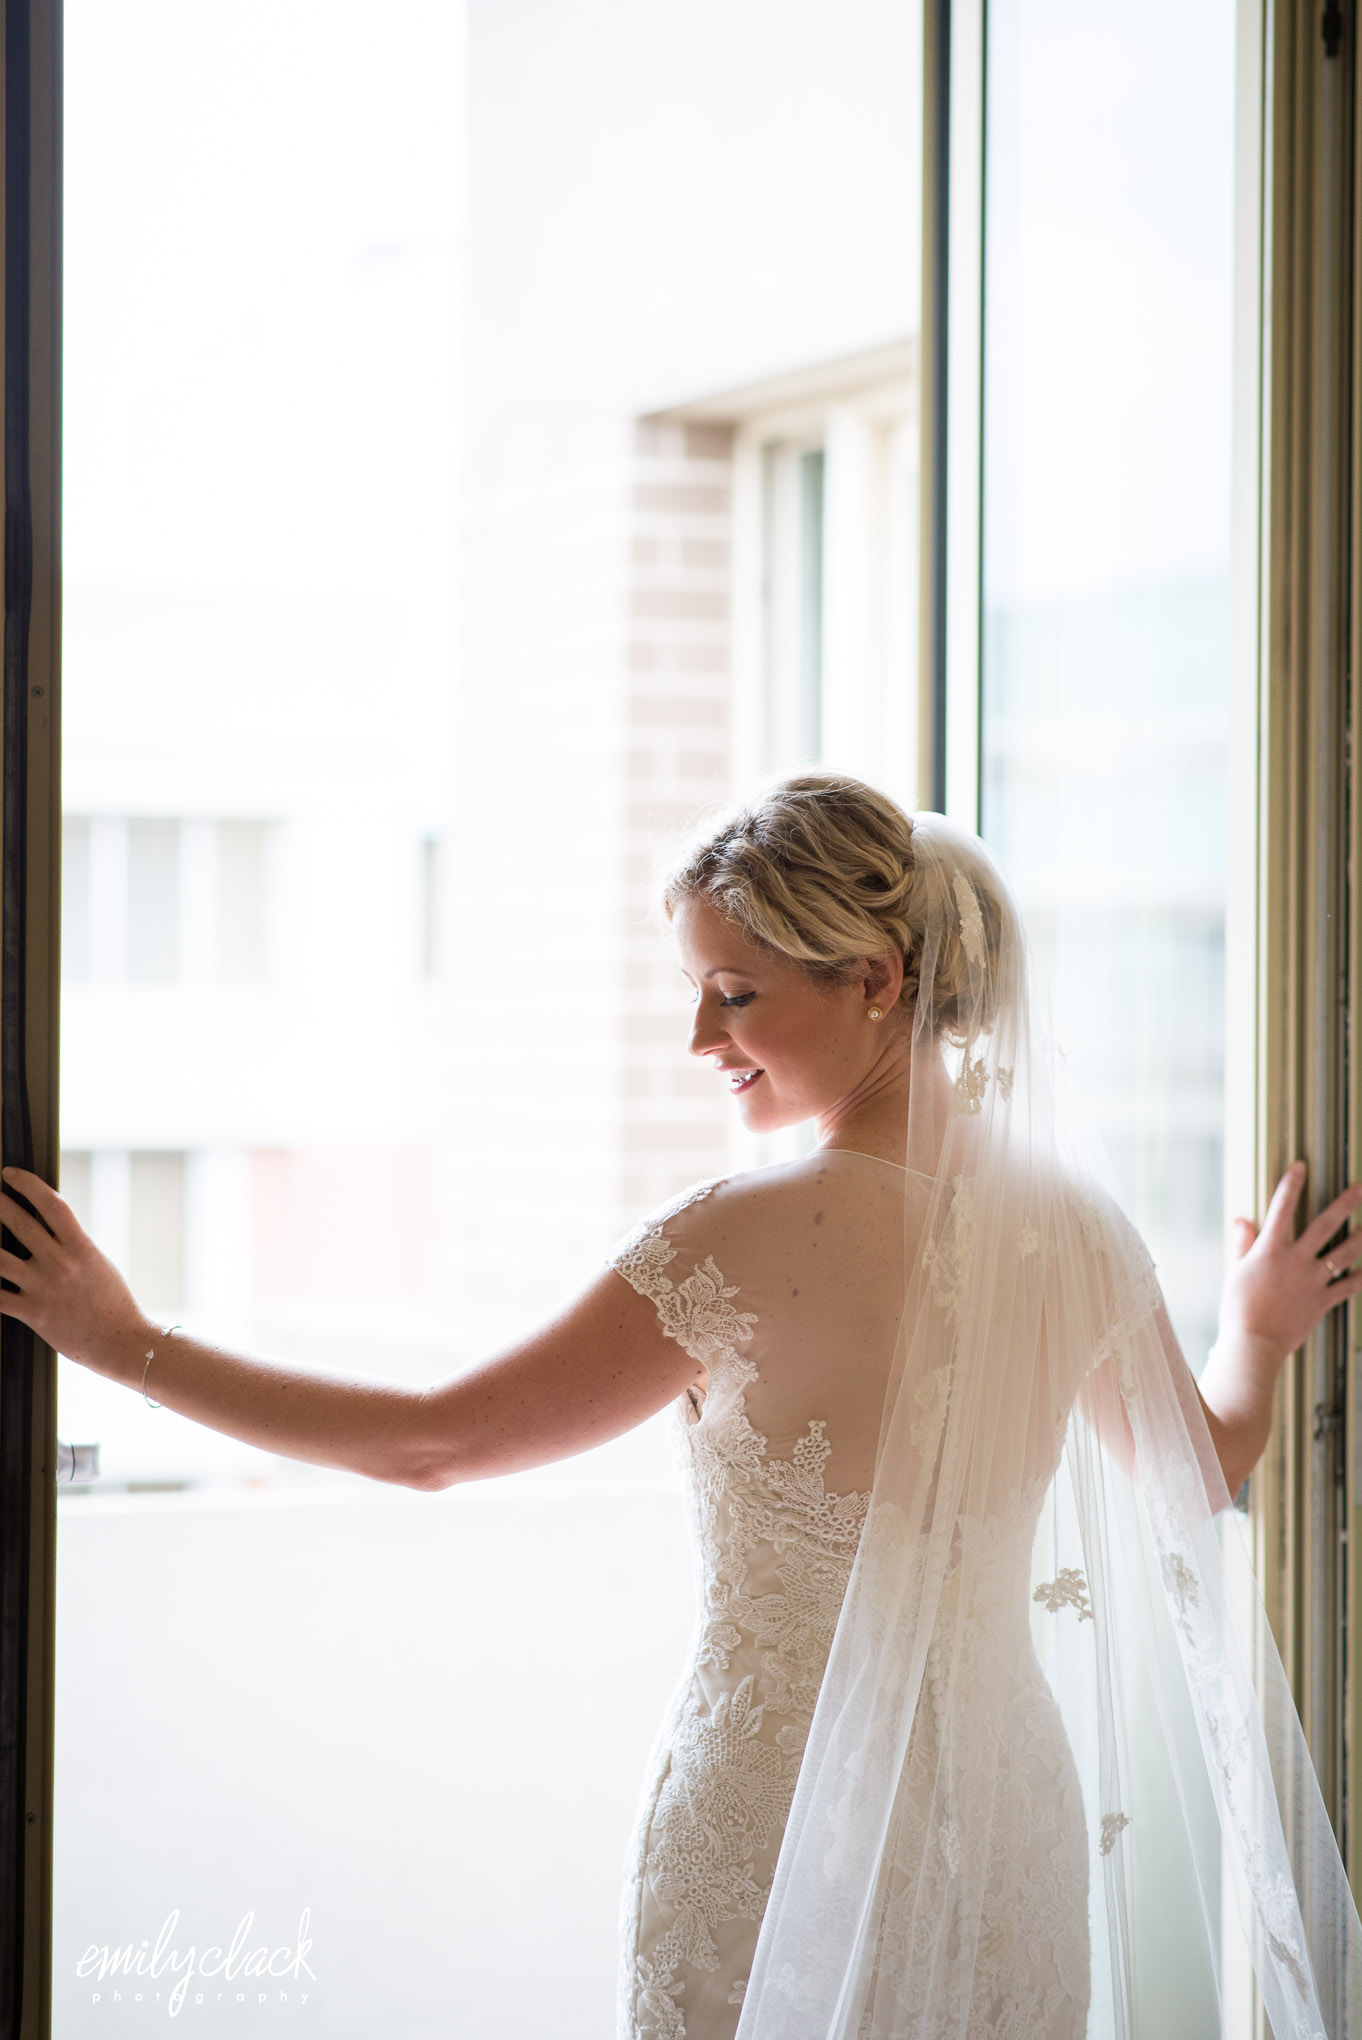  Katie + Doug on July 26, 2014 ♥ Emily Clack Photography at Dahlgren Chapel of the Sacred Heart (Georgetown University) 